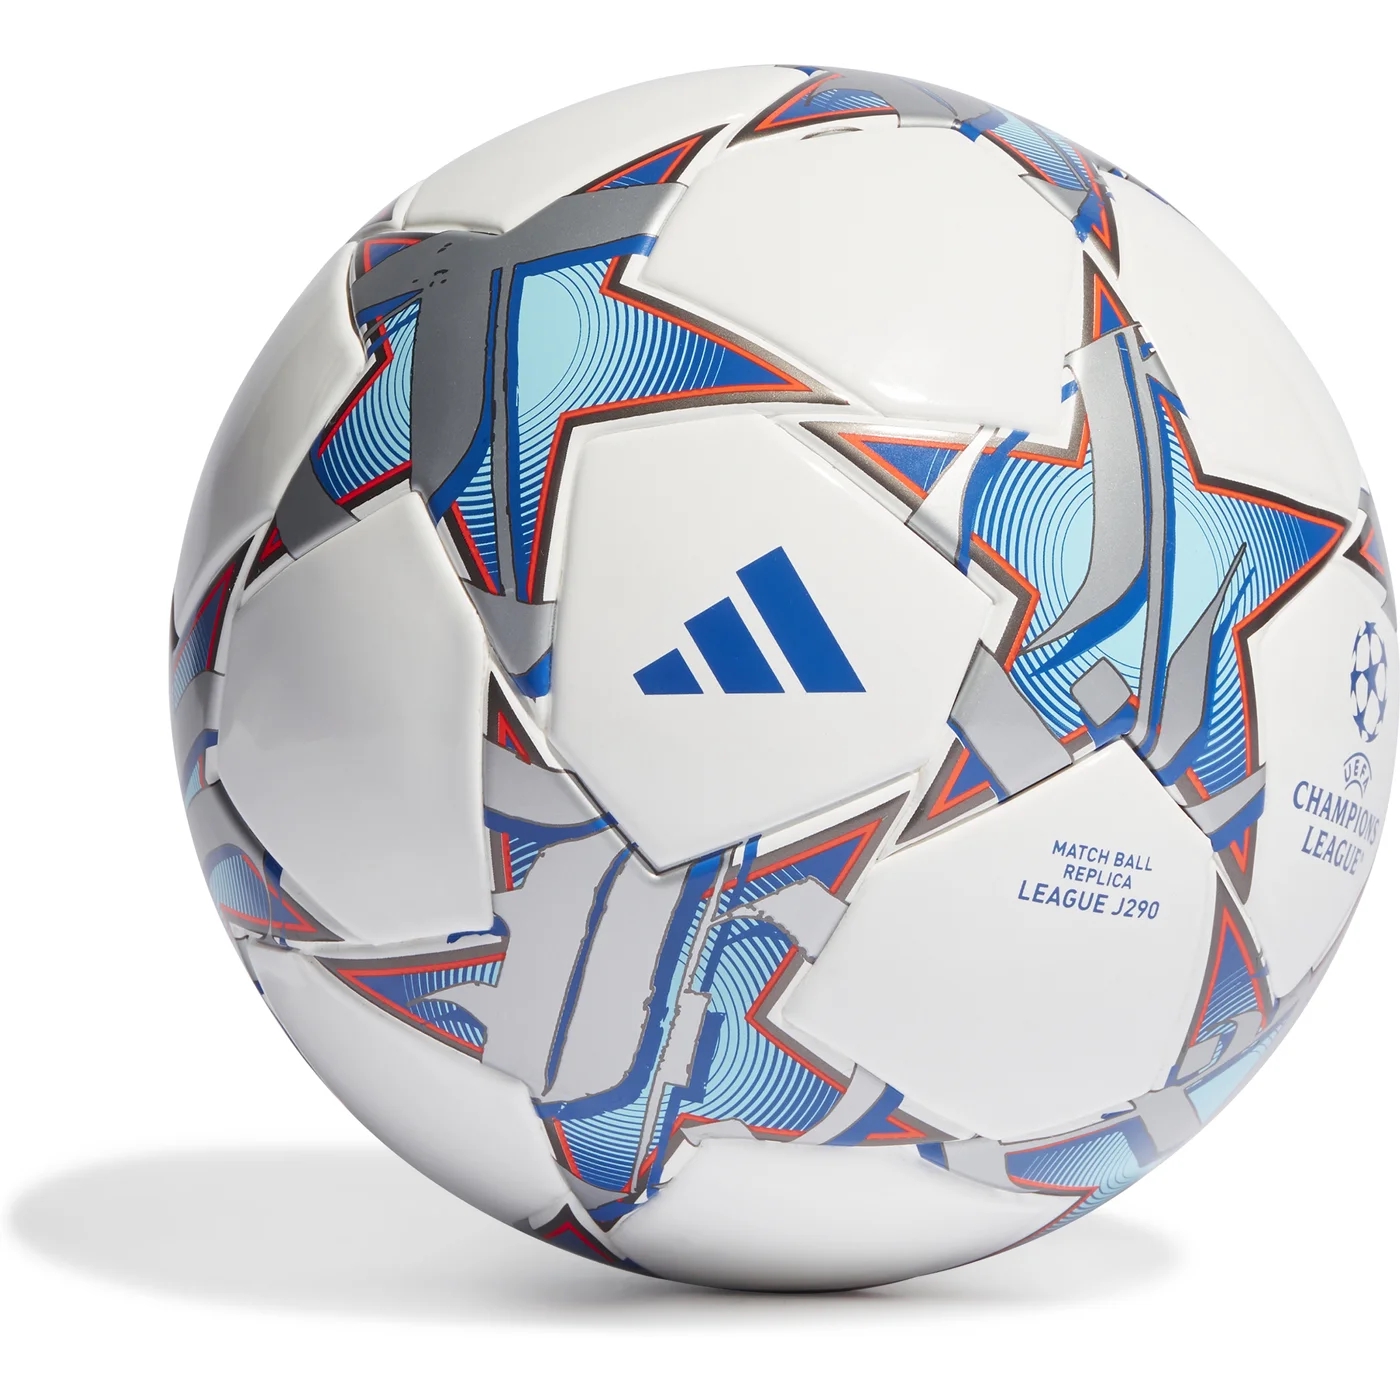 ADIDAS BALL UCL JUNIOR 290 LEAGUE 23/24 GROUP STAGE KIDS WHITE/SILVMT/BRCYAN/S 4CbShsBs